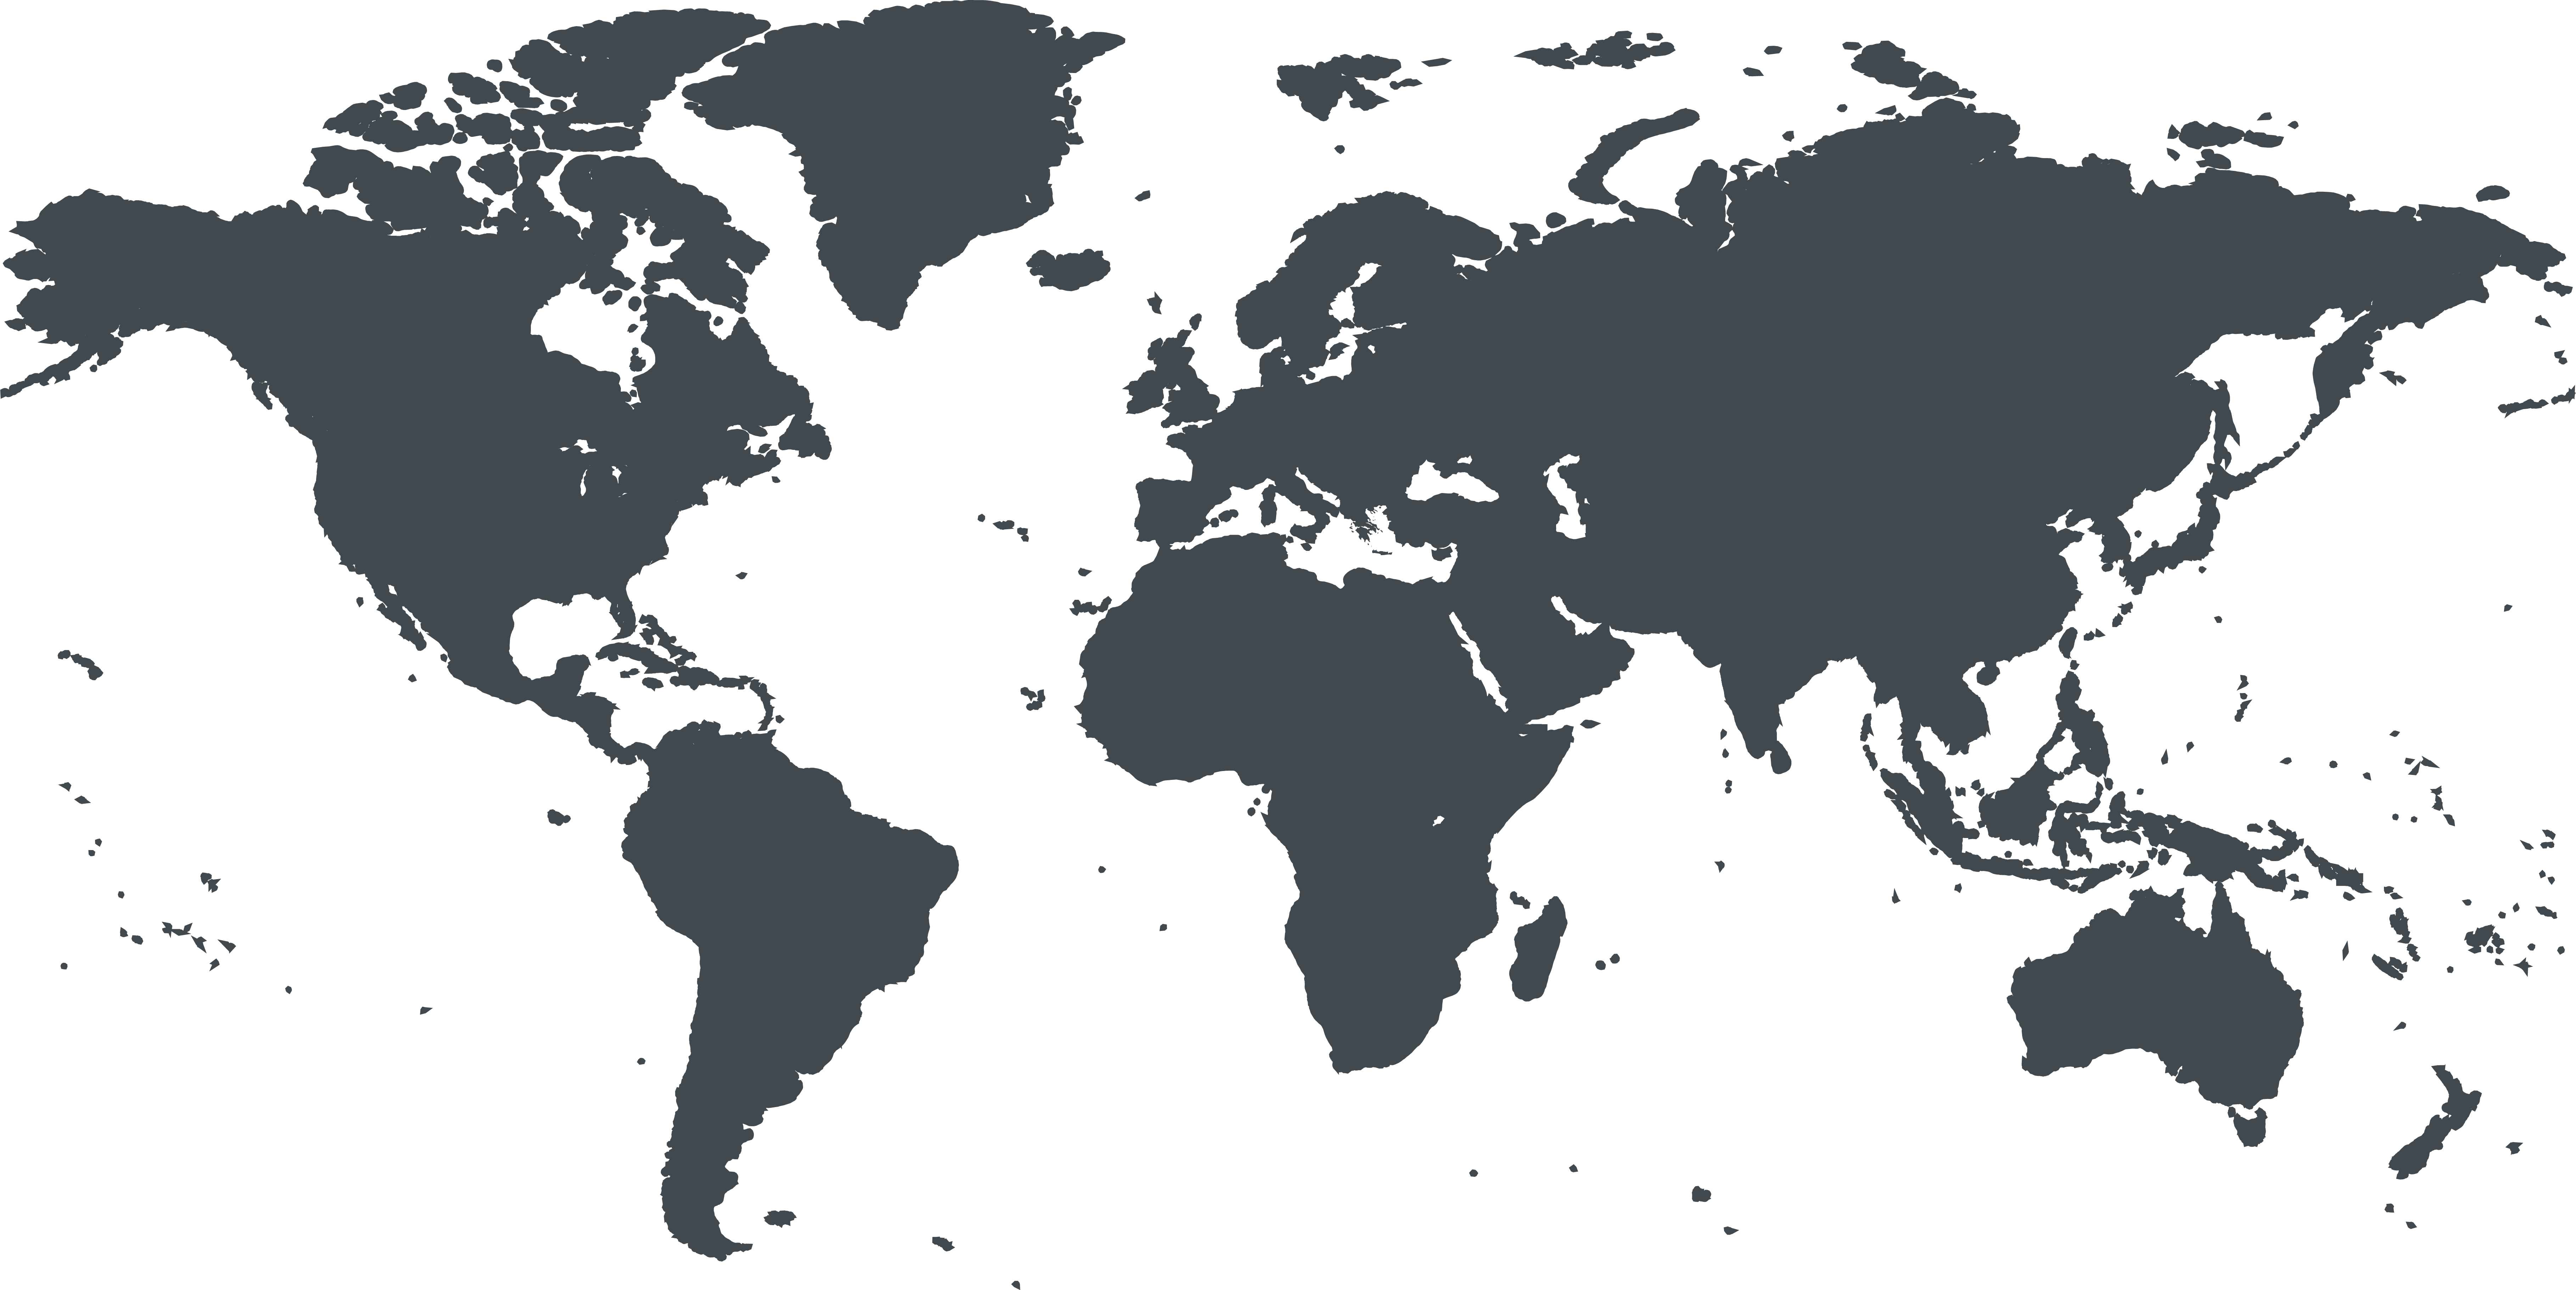 A world map with highlighted countries in grey.